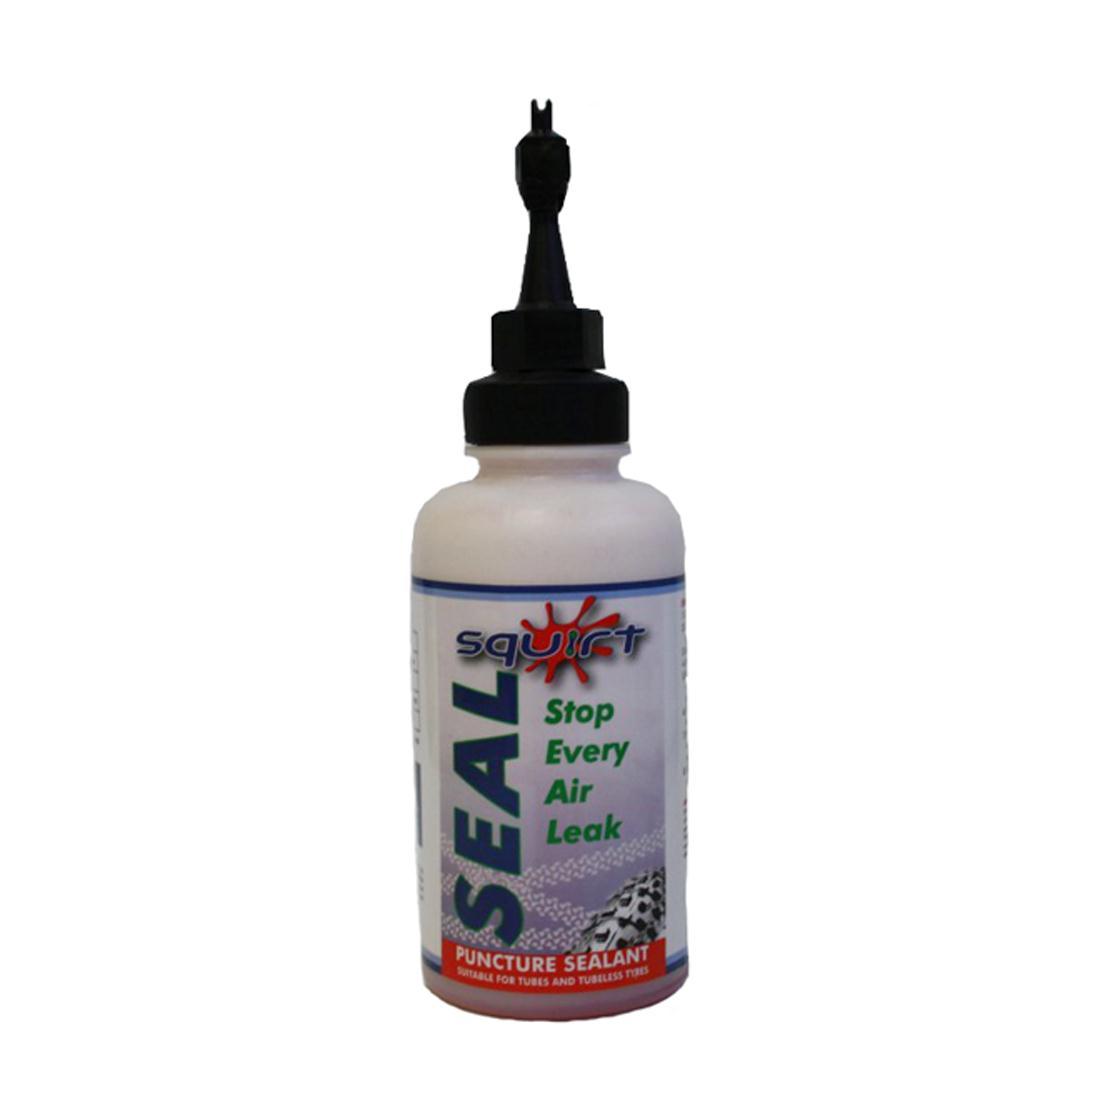 Squirt lube 001499200ml sealant anti leak and puncture 200 ml Sealant